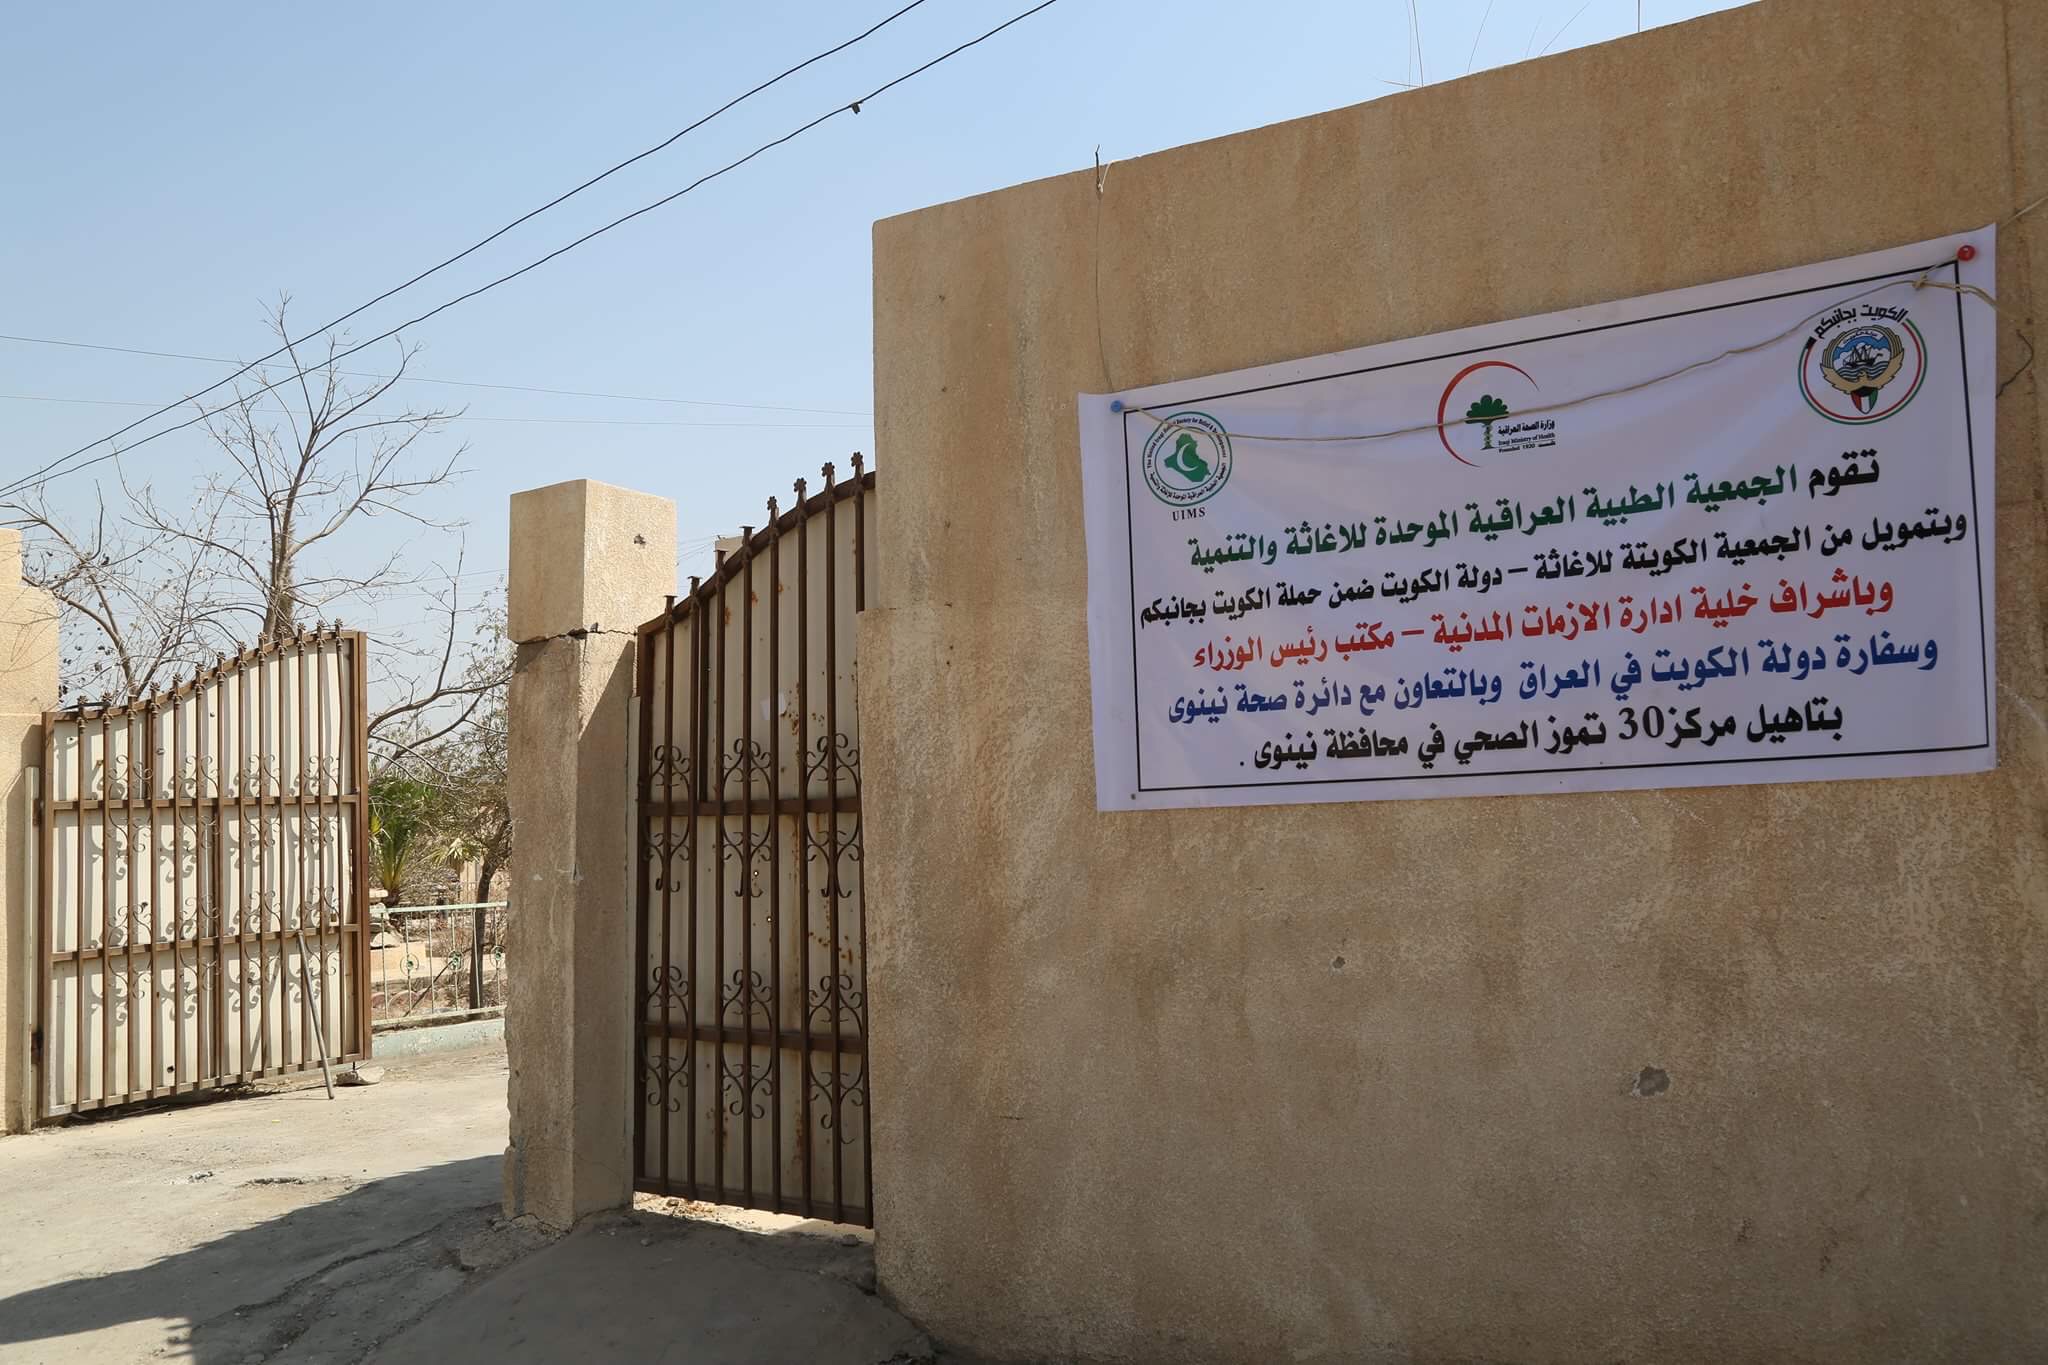 Kuwait relief agency renovates medical center in Mosul